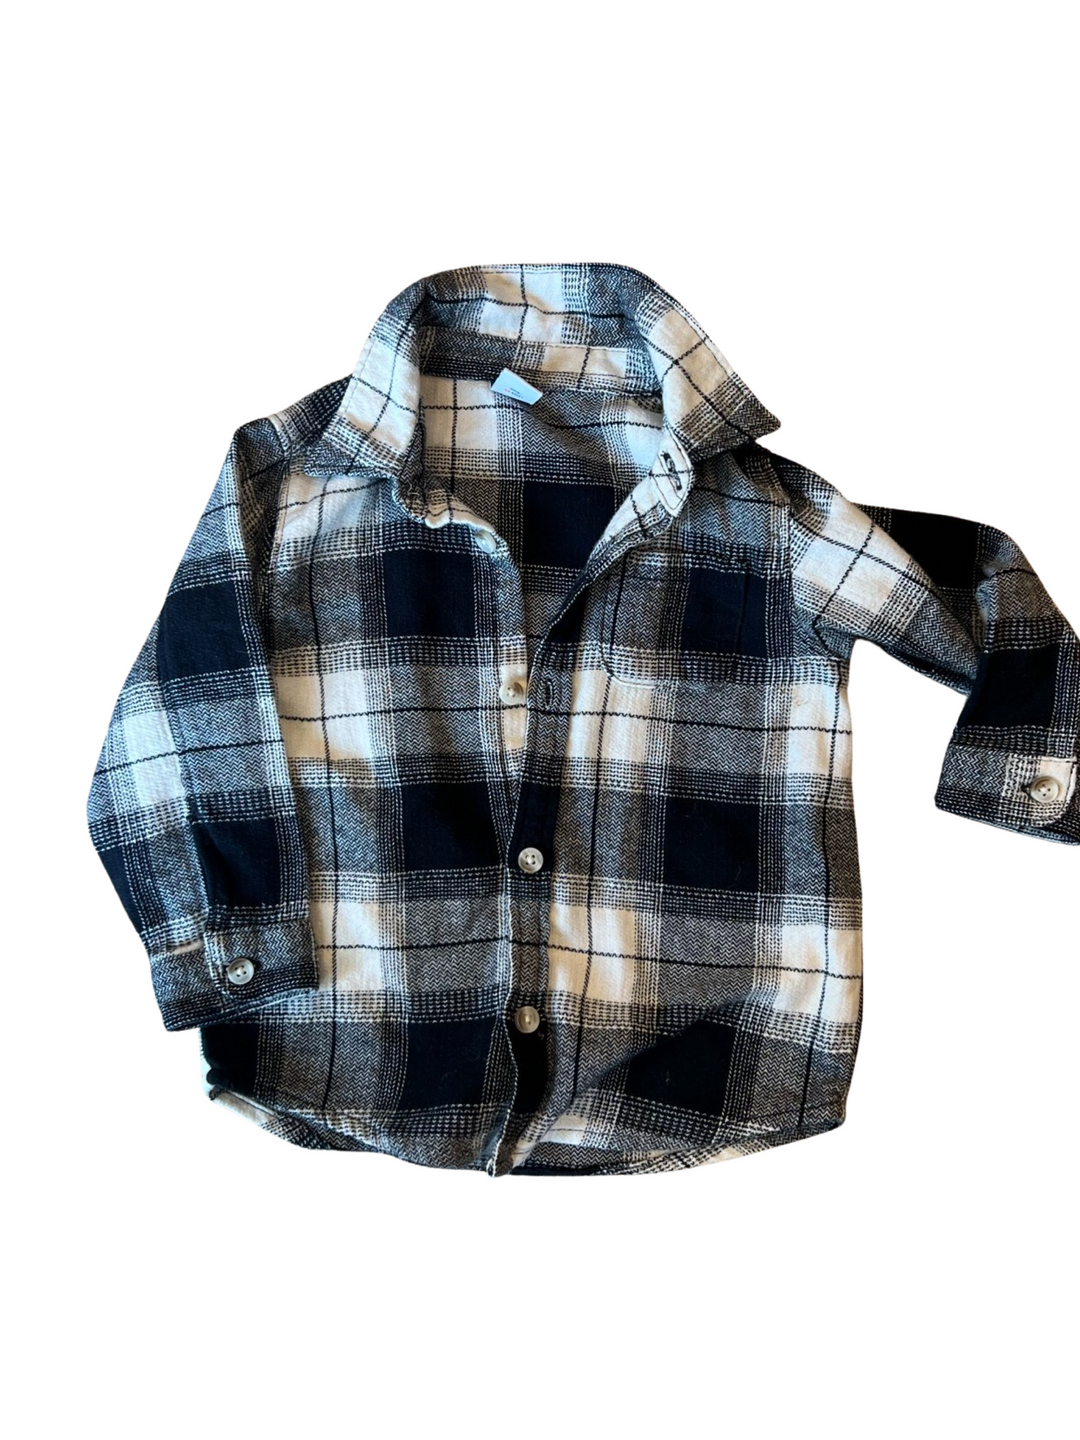 Black and white vintage flannel